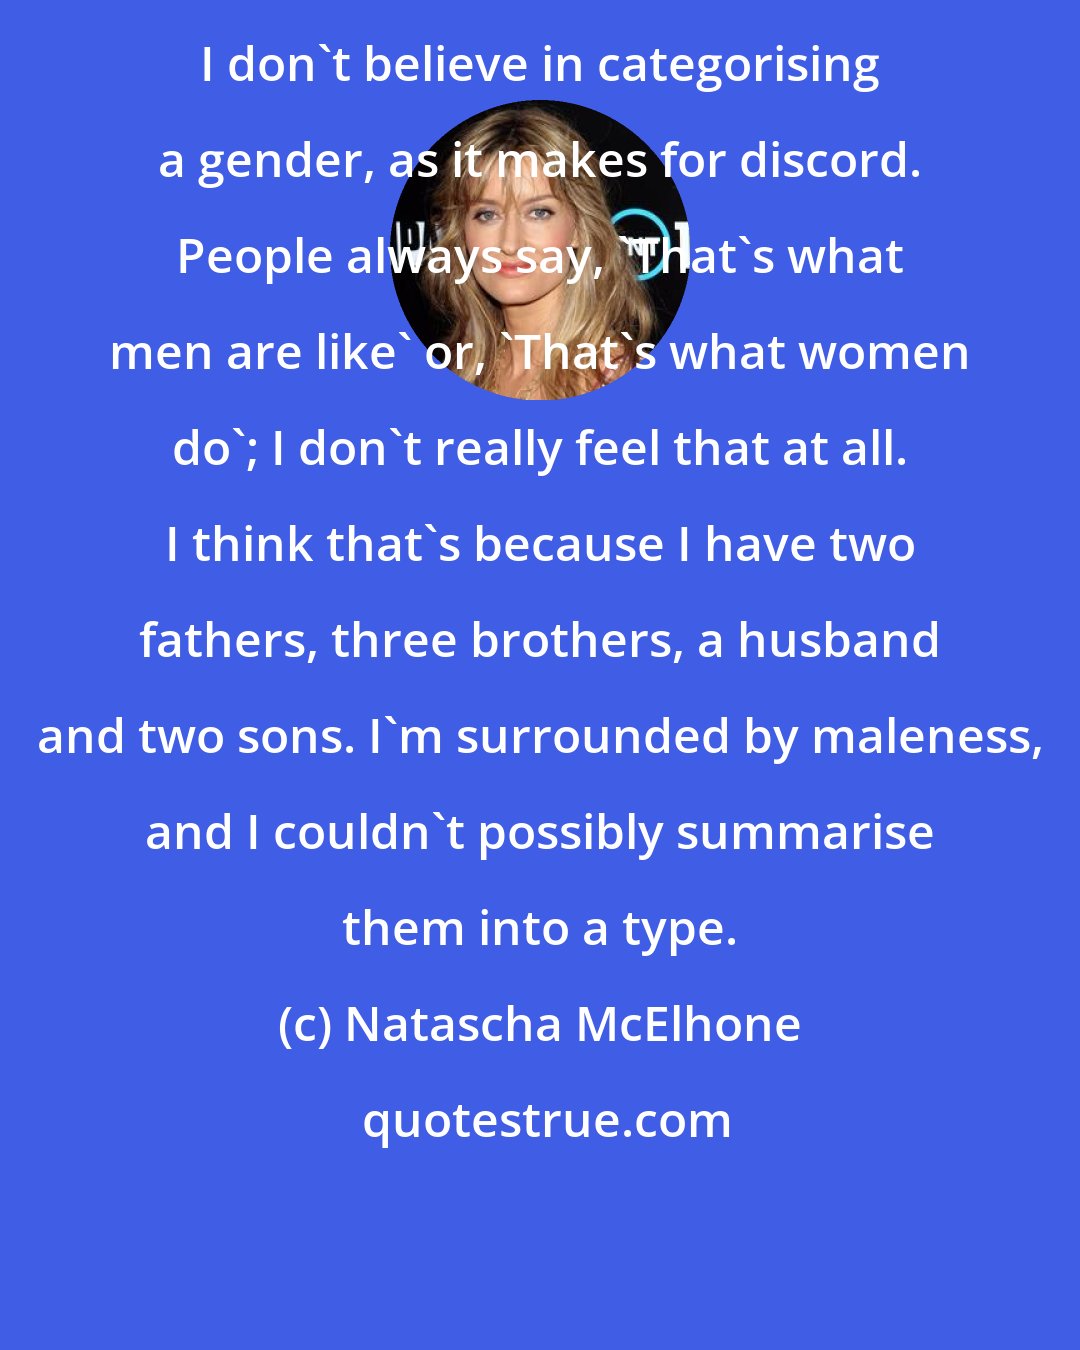 Natascha McElhone: I don't believe in categorising a gender, as it makes for discord. People always say, 'That's what men are like' or, 'That's what women do'; I don't really feel that at all. I think that's because I have two fathers, three brothers, a husband and two sons. I'm surrounded by maleness, and I couldn't possibly summarise them into a type.